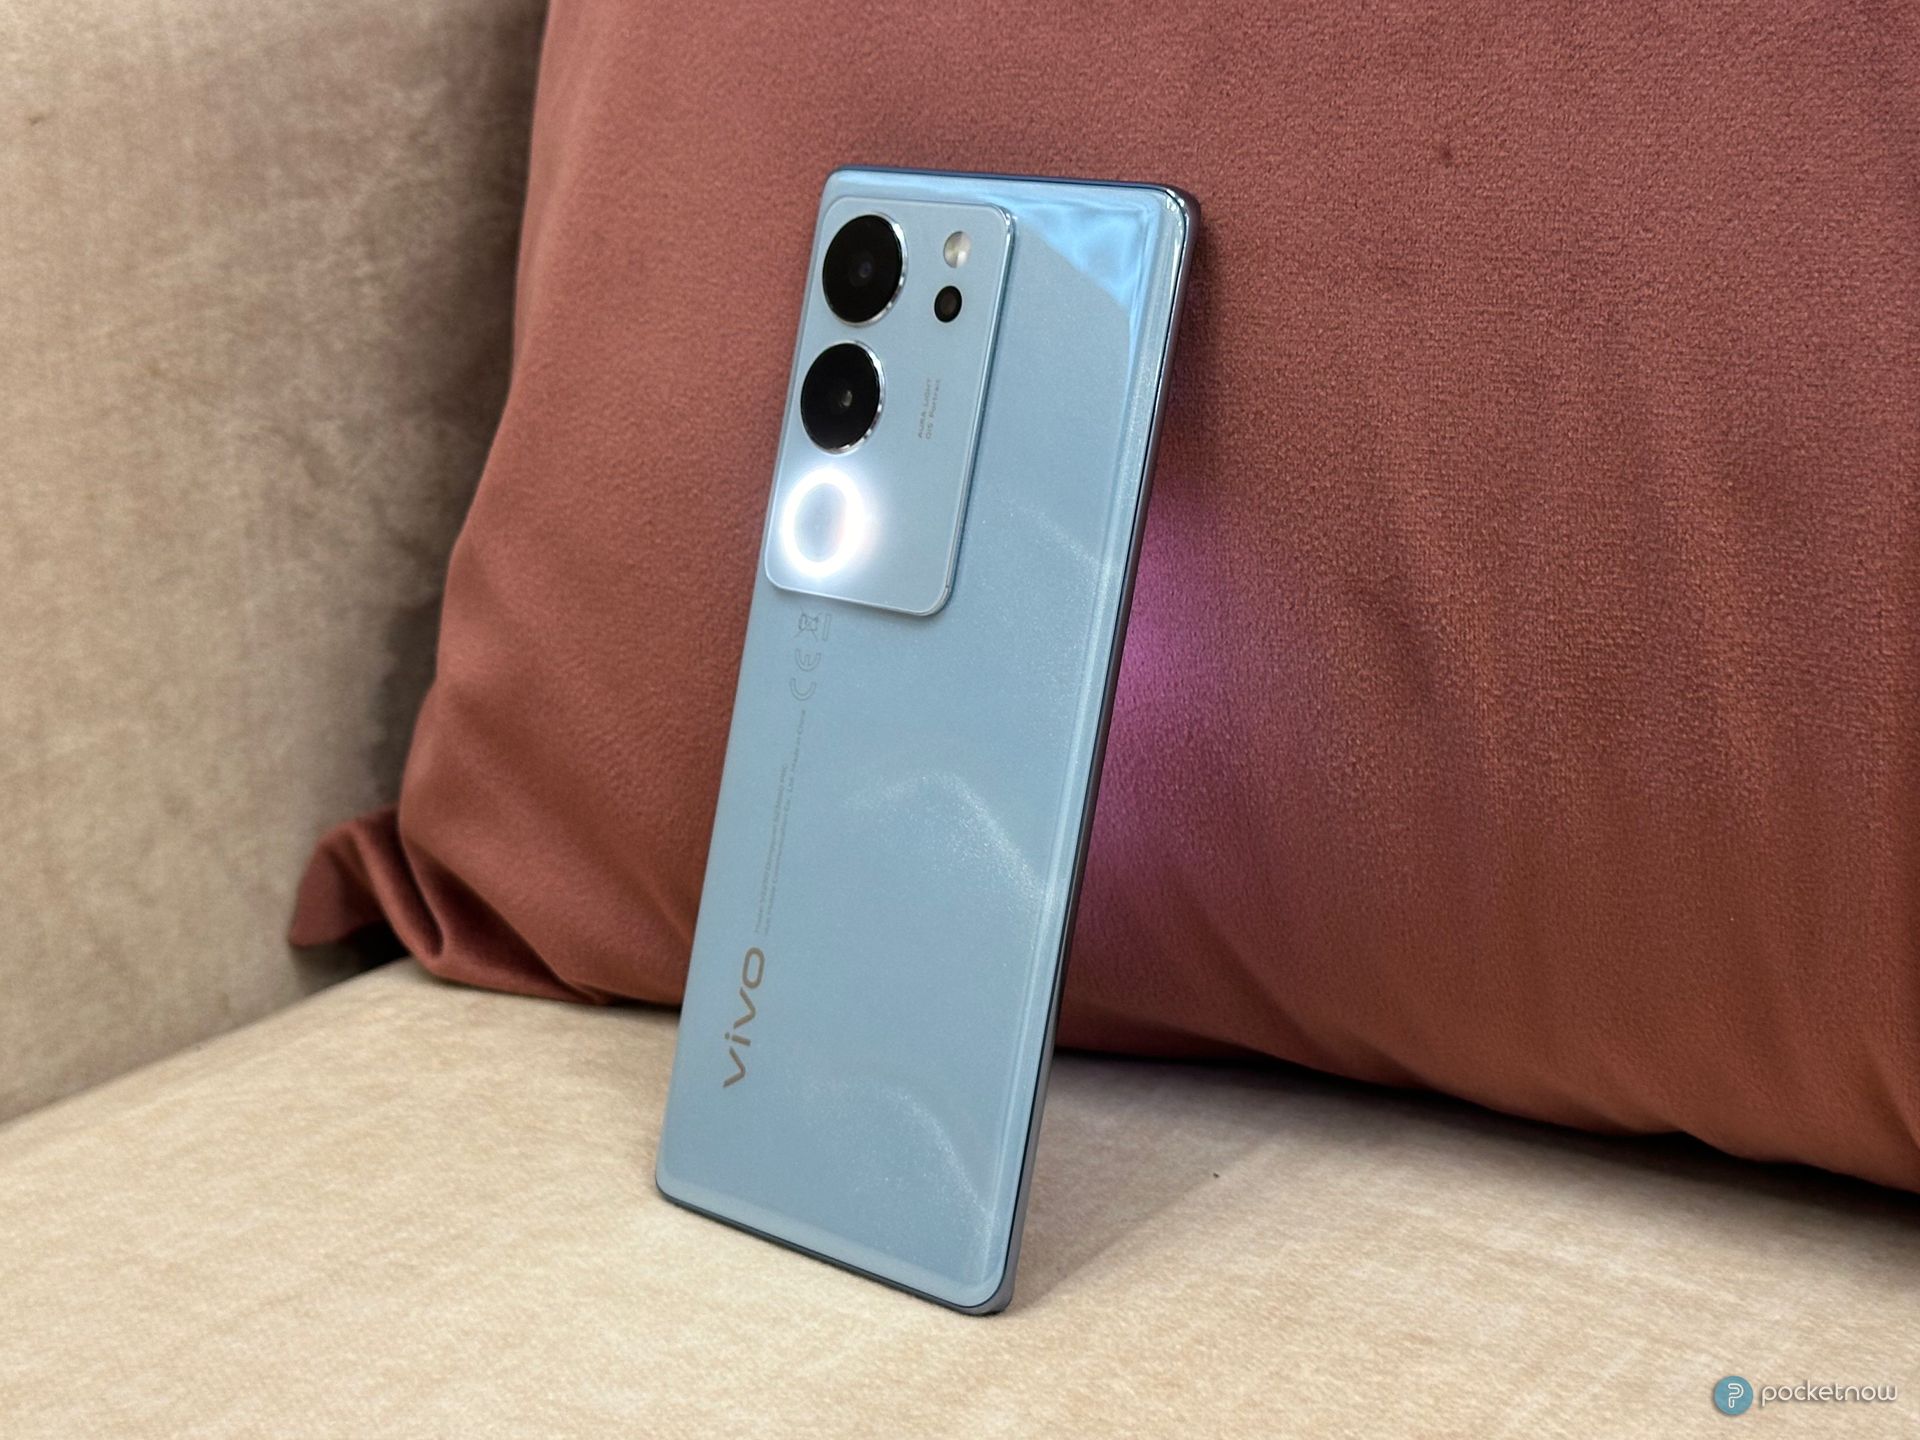 Vivo Solid display and camera in a sleek package